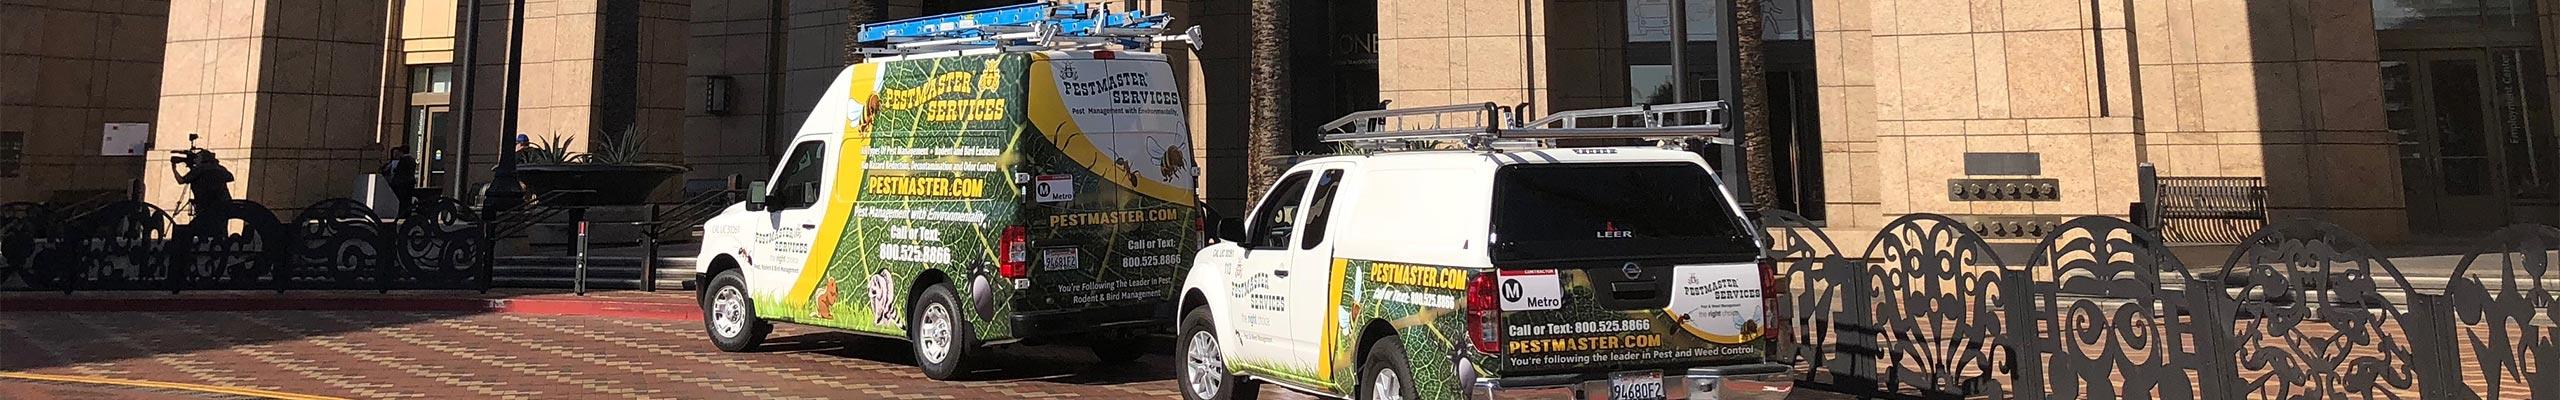 two pest control service vehicles parked outside of a commercial building